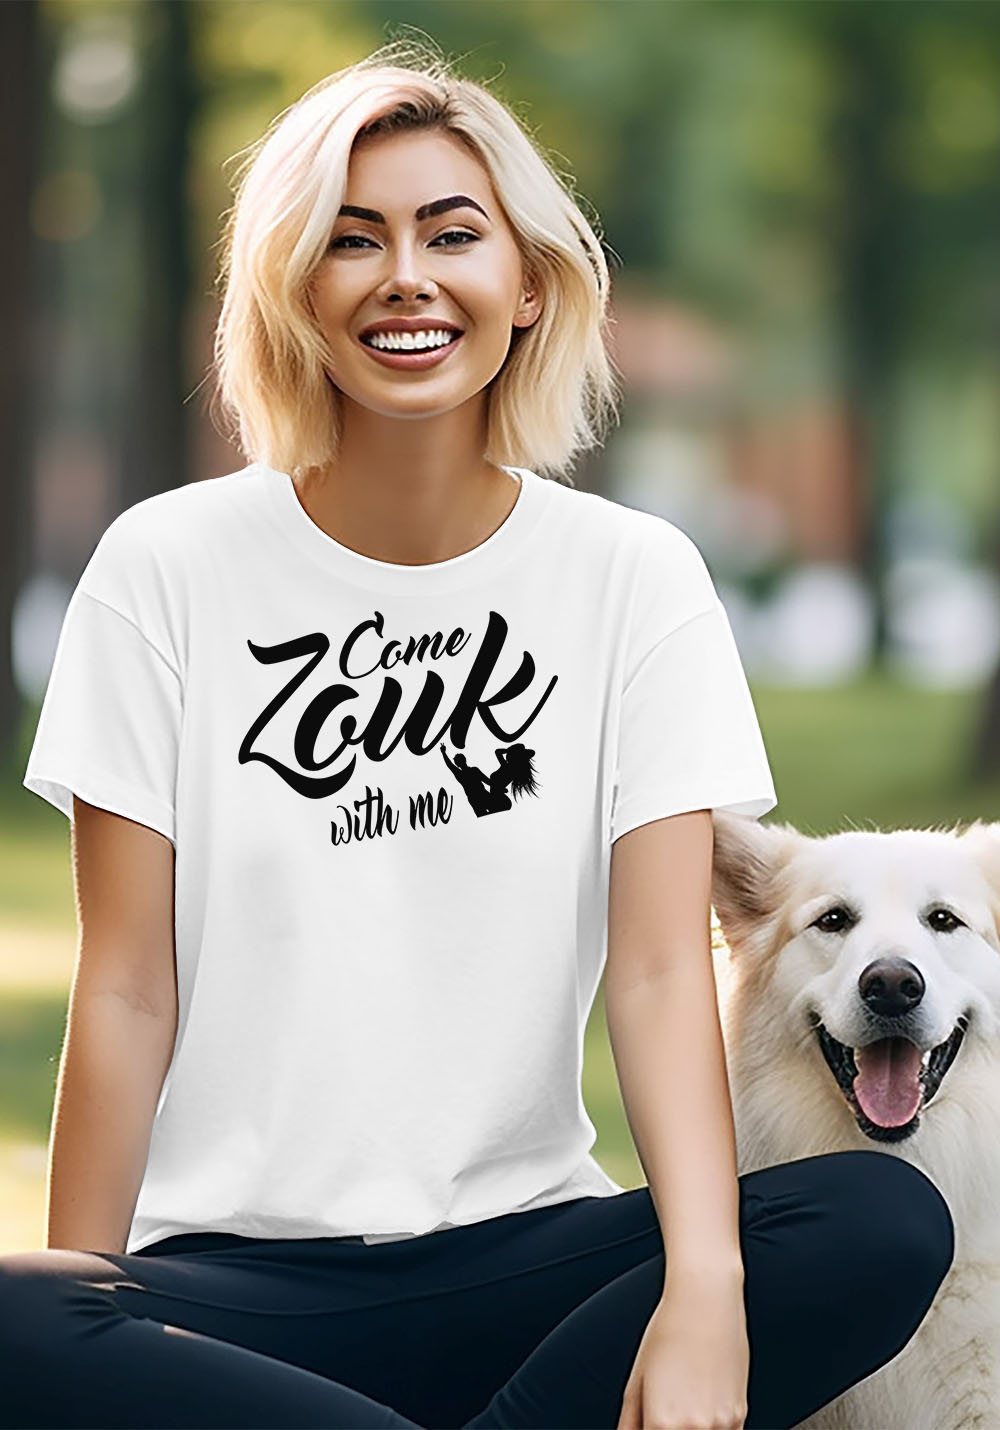 Woman wearing Zouk T-shirt decorated with unique “Come Zouk with me” design in white crew neck style